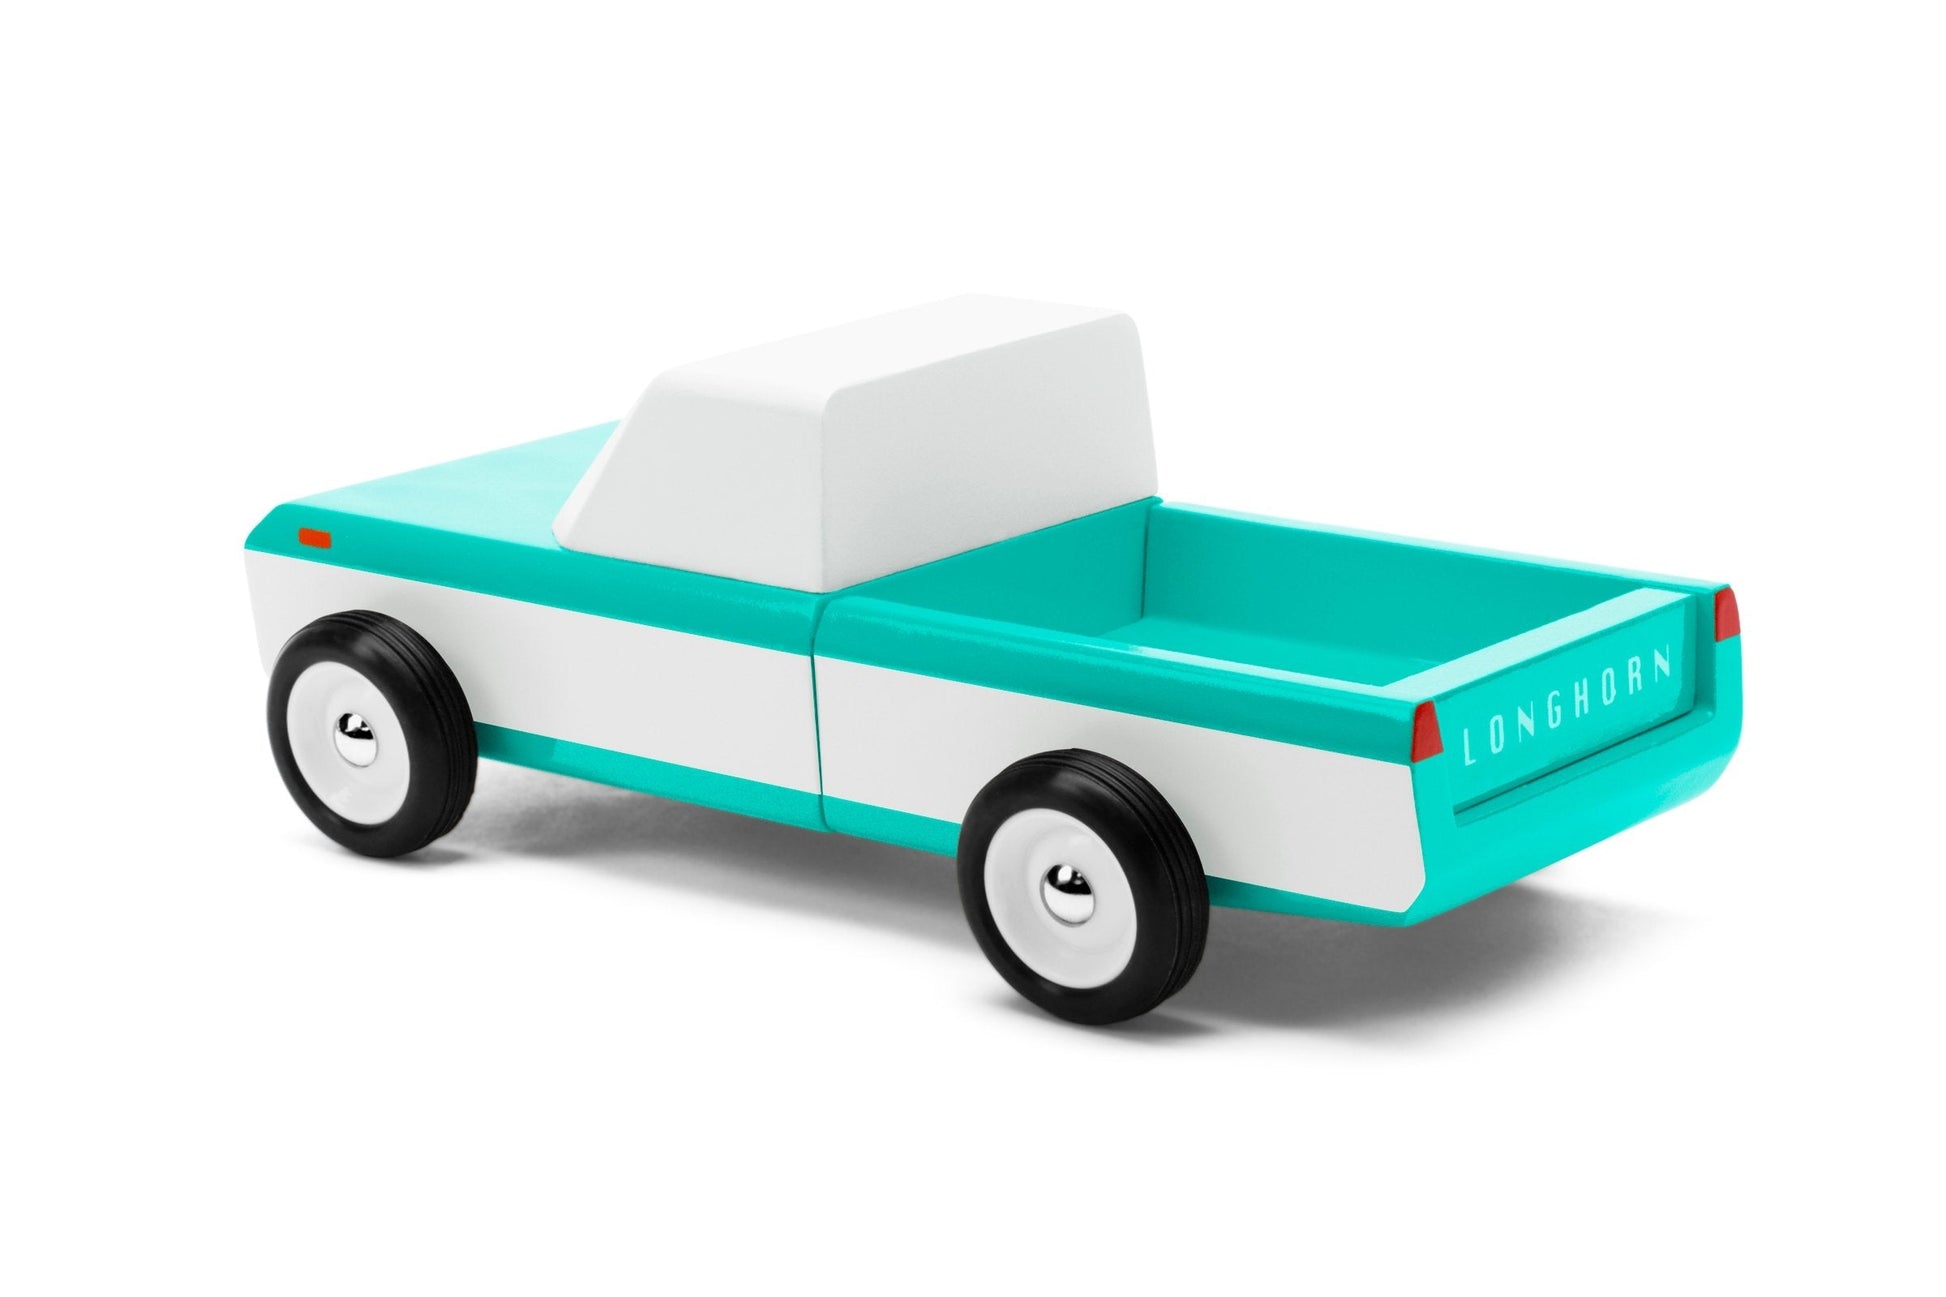 Longhorn toy truck by Candylab. Their first pick-up because c'mon, we all need a little pickup in our lives. Comes in two color variations - don't forget, you can pile your surfboards in the truck bed!